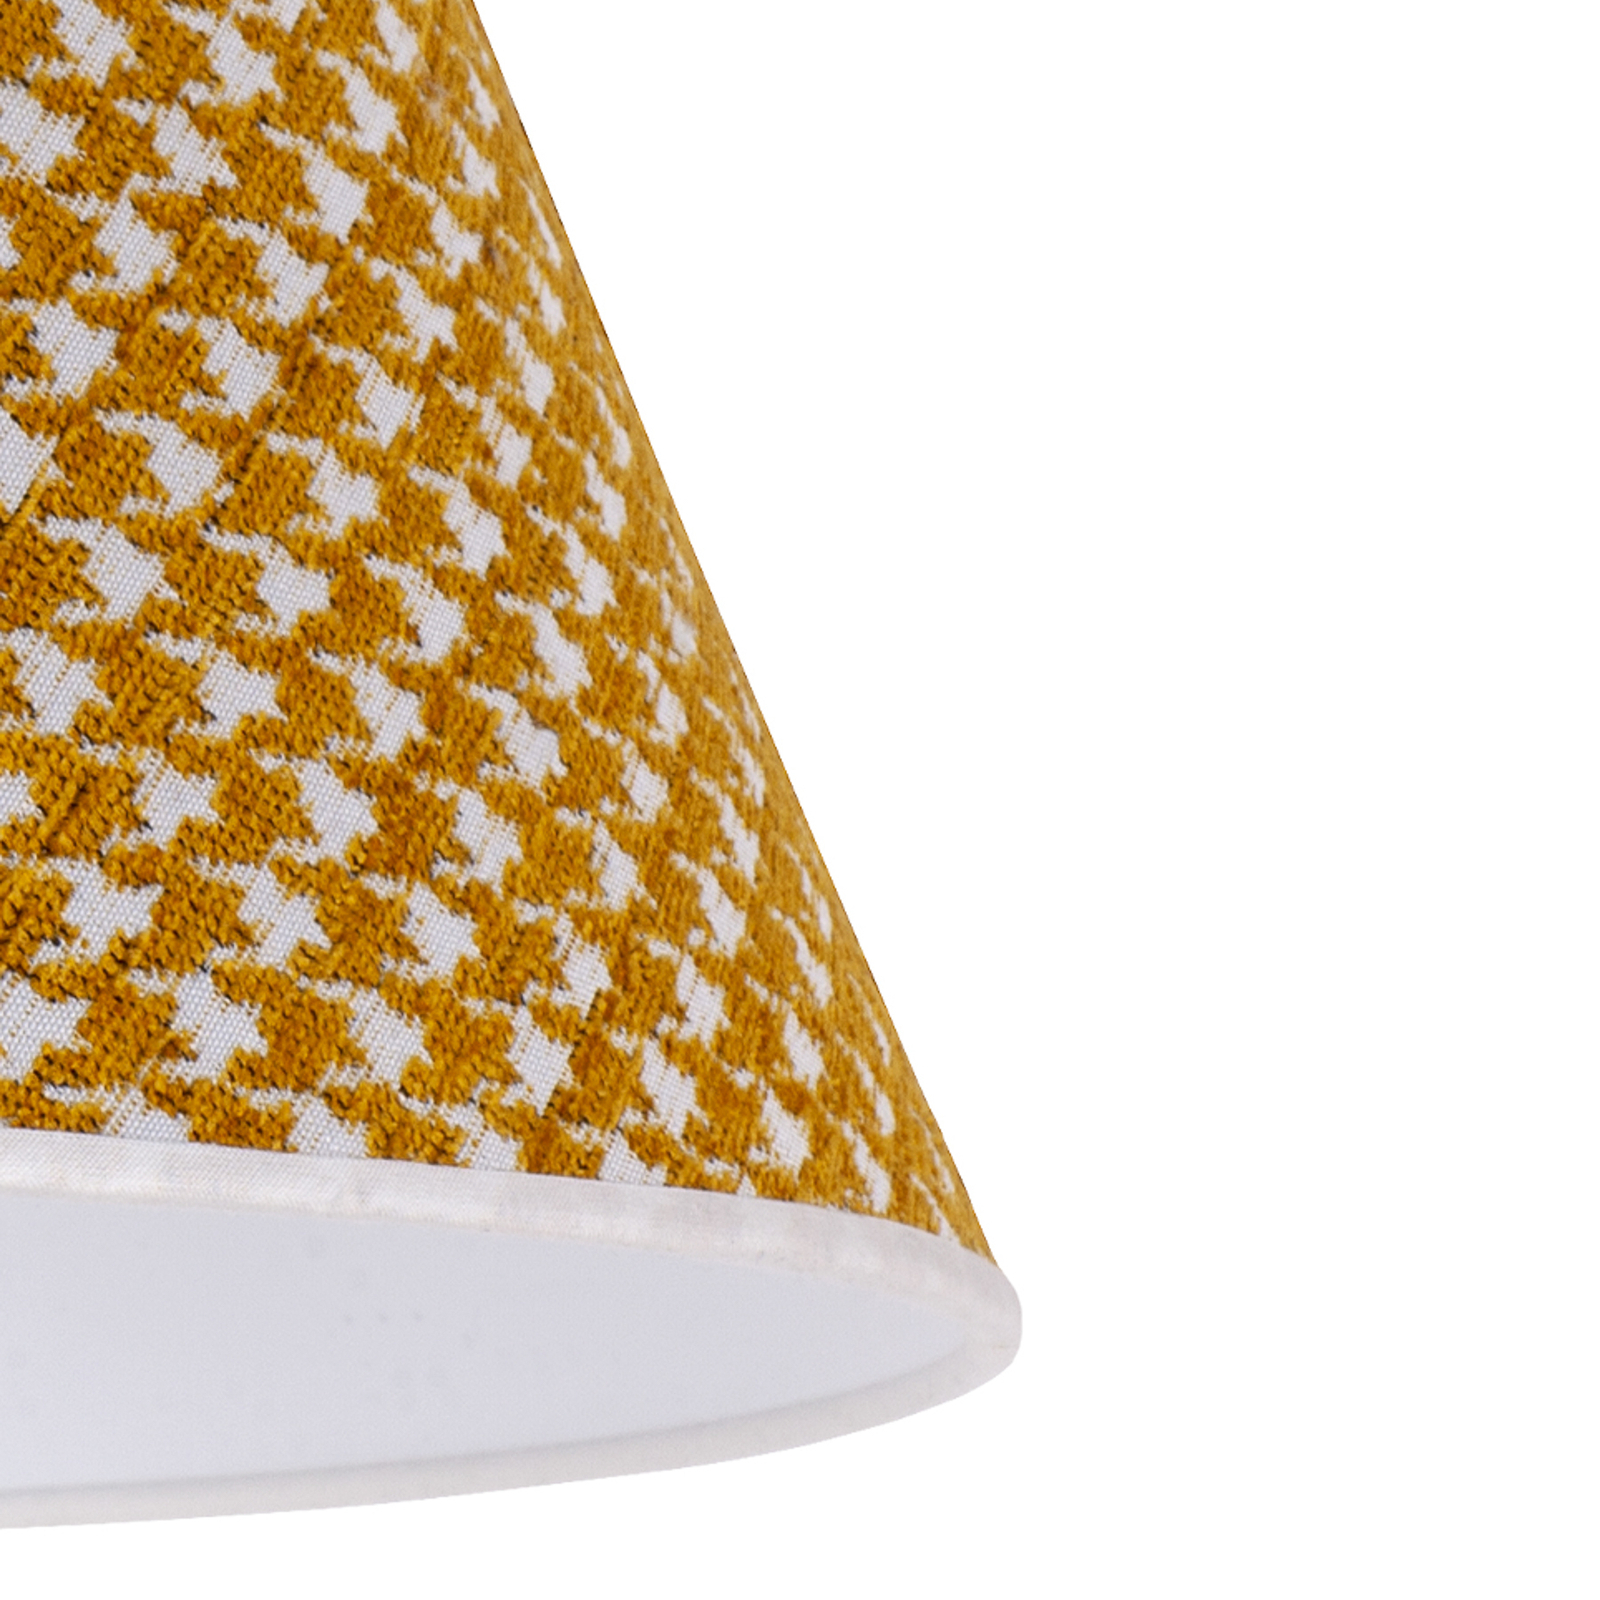 Sofia lampshade 15.5 cm houndstooth pattern yellow